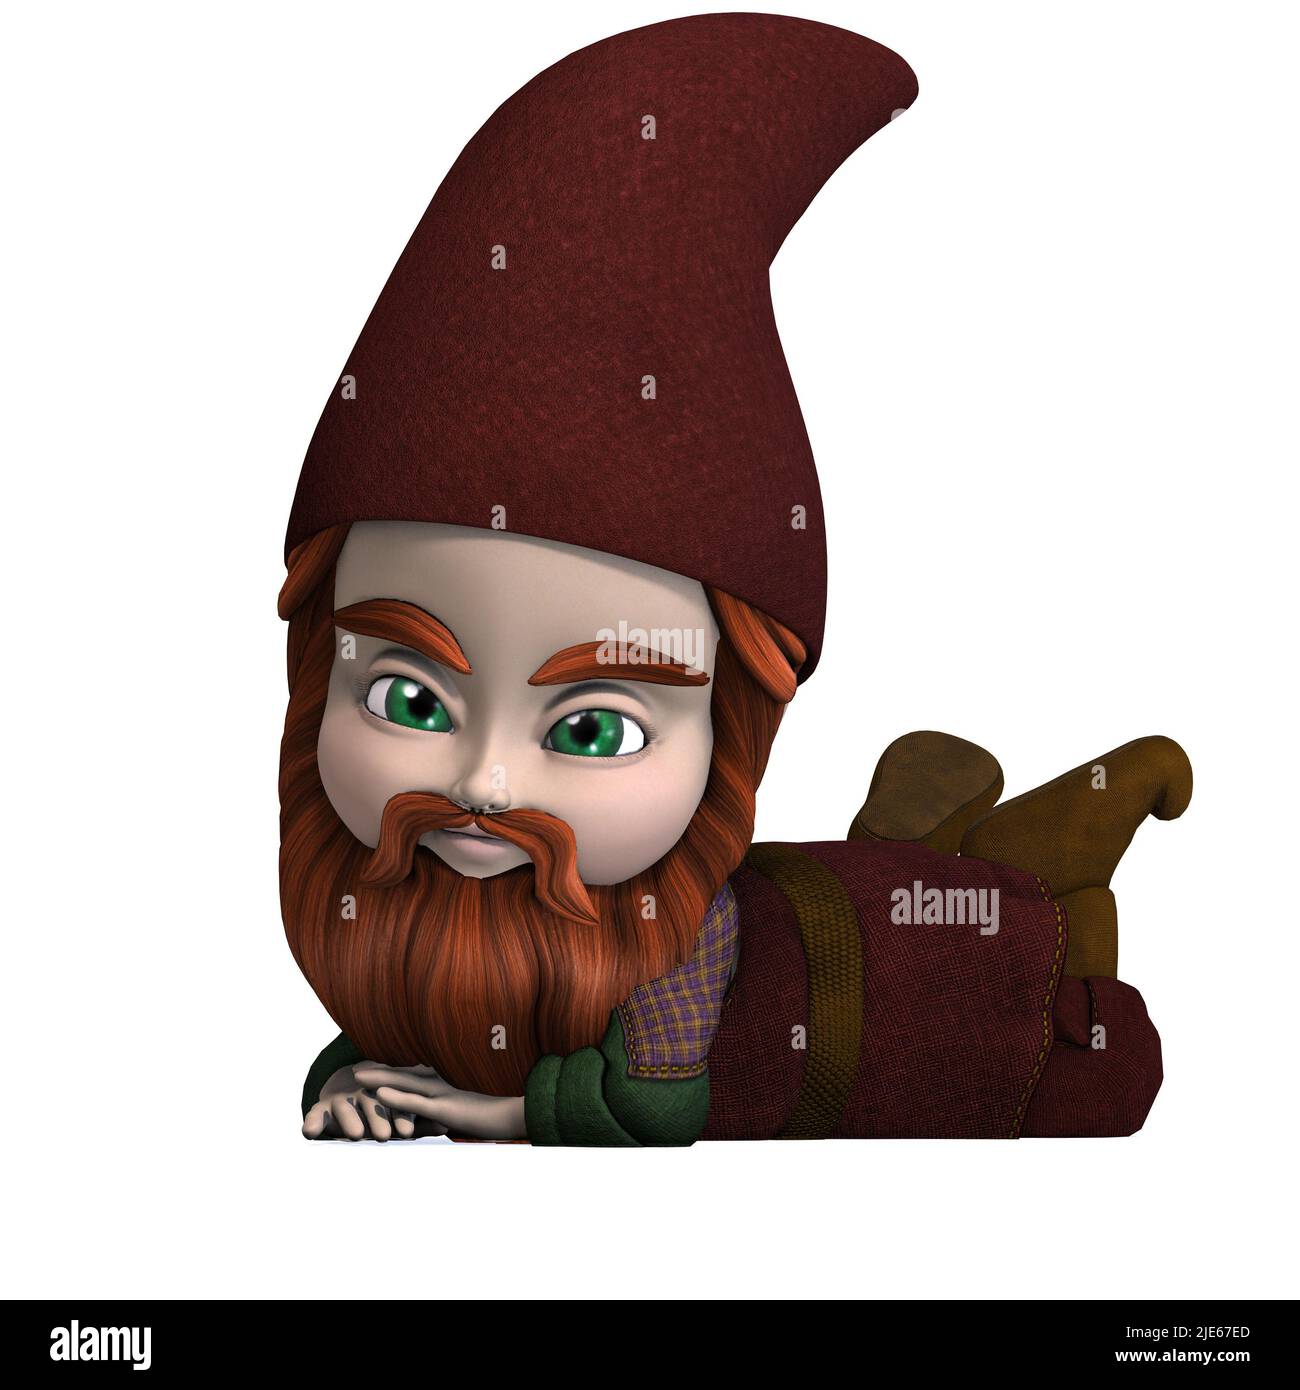 3D-illustration of a cute and funny cartoon garden gnome. isolated ...